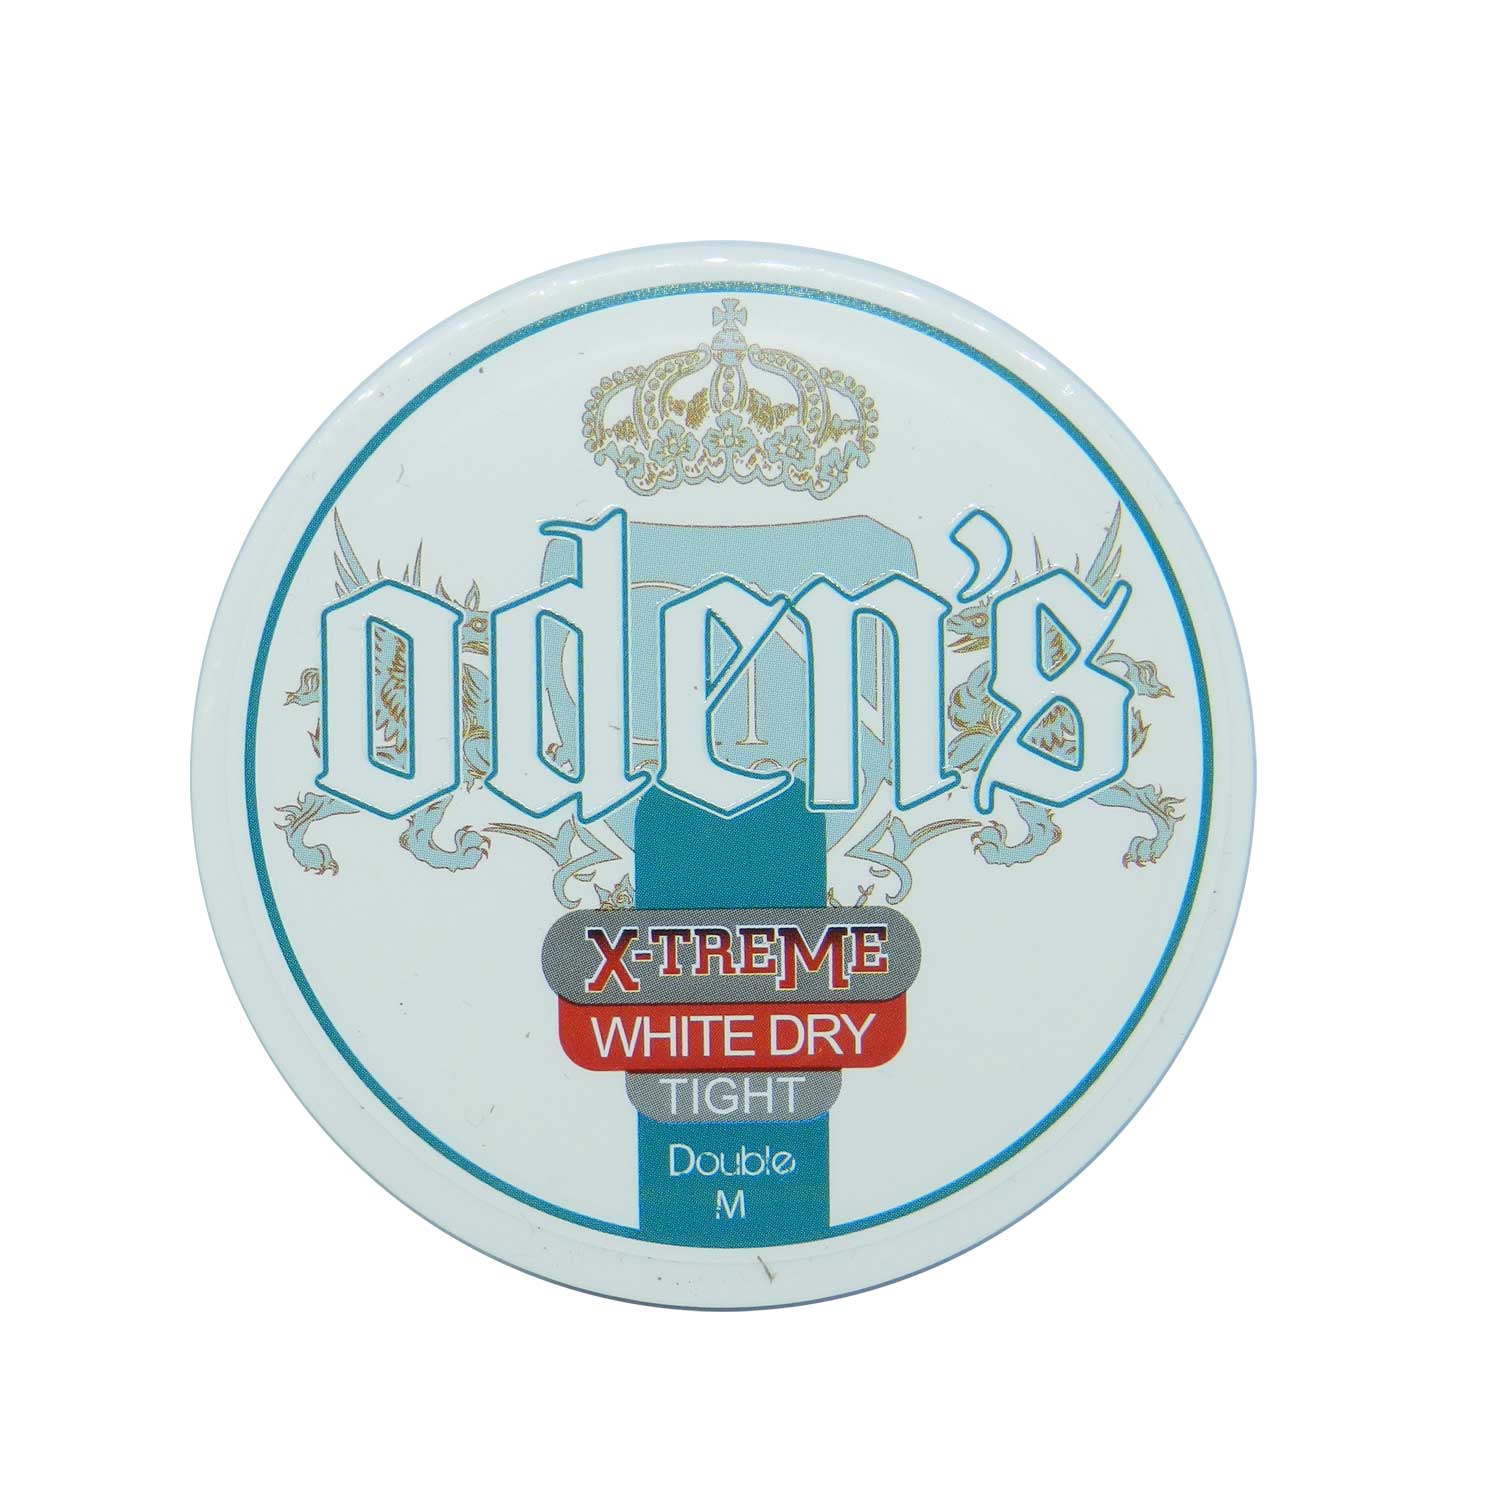 Odens Double M. Extreme White Dry Tight 10g